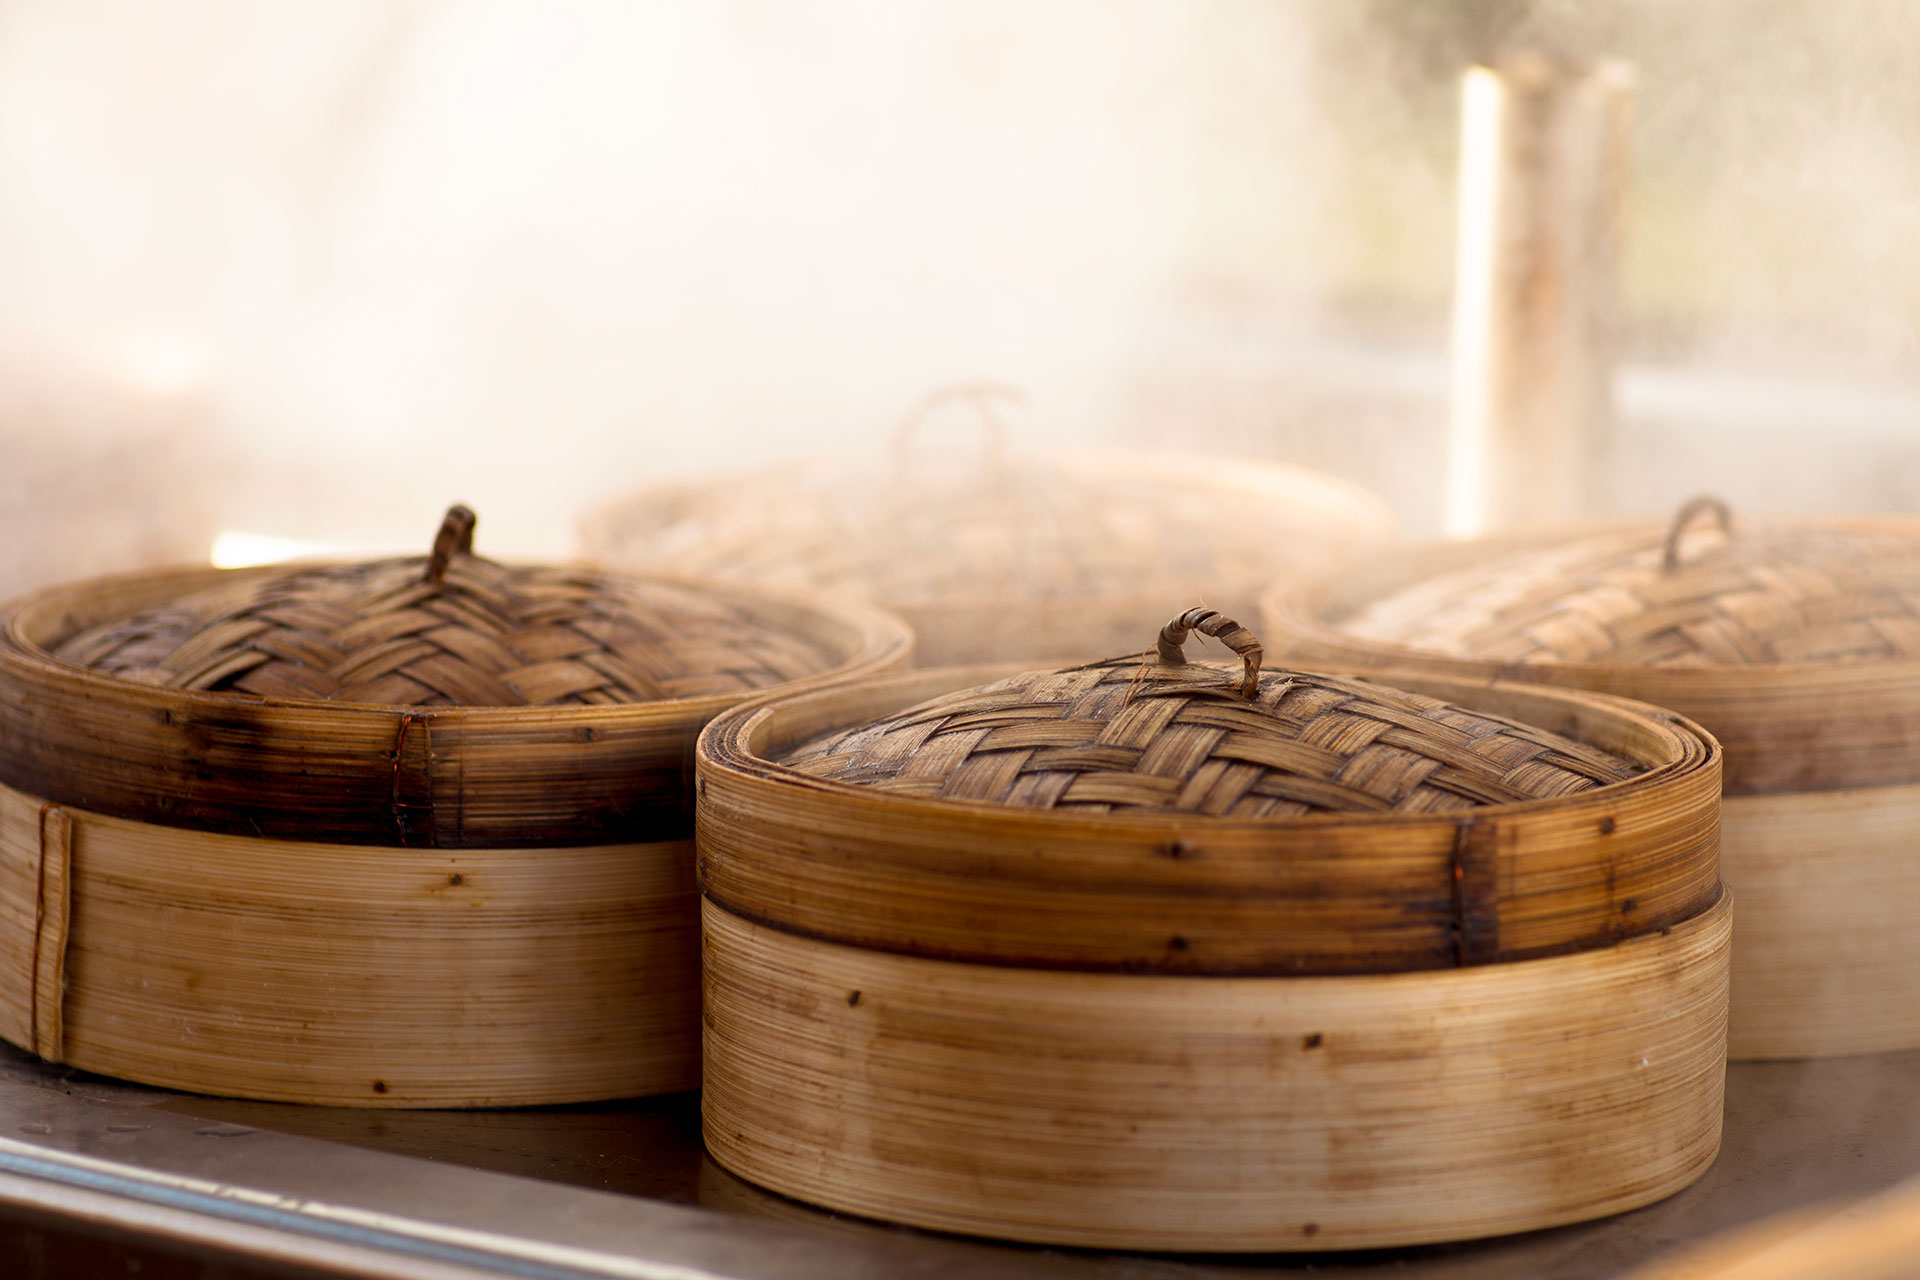 https://asianinspirations.com.au/wp-content/uploads/2023/03/Bamboo-Steamer-The-Ultimate-Dim-Sum-Cooker_00-Feat-Img%20(1).jpg